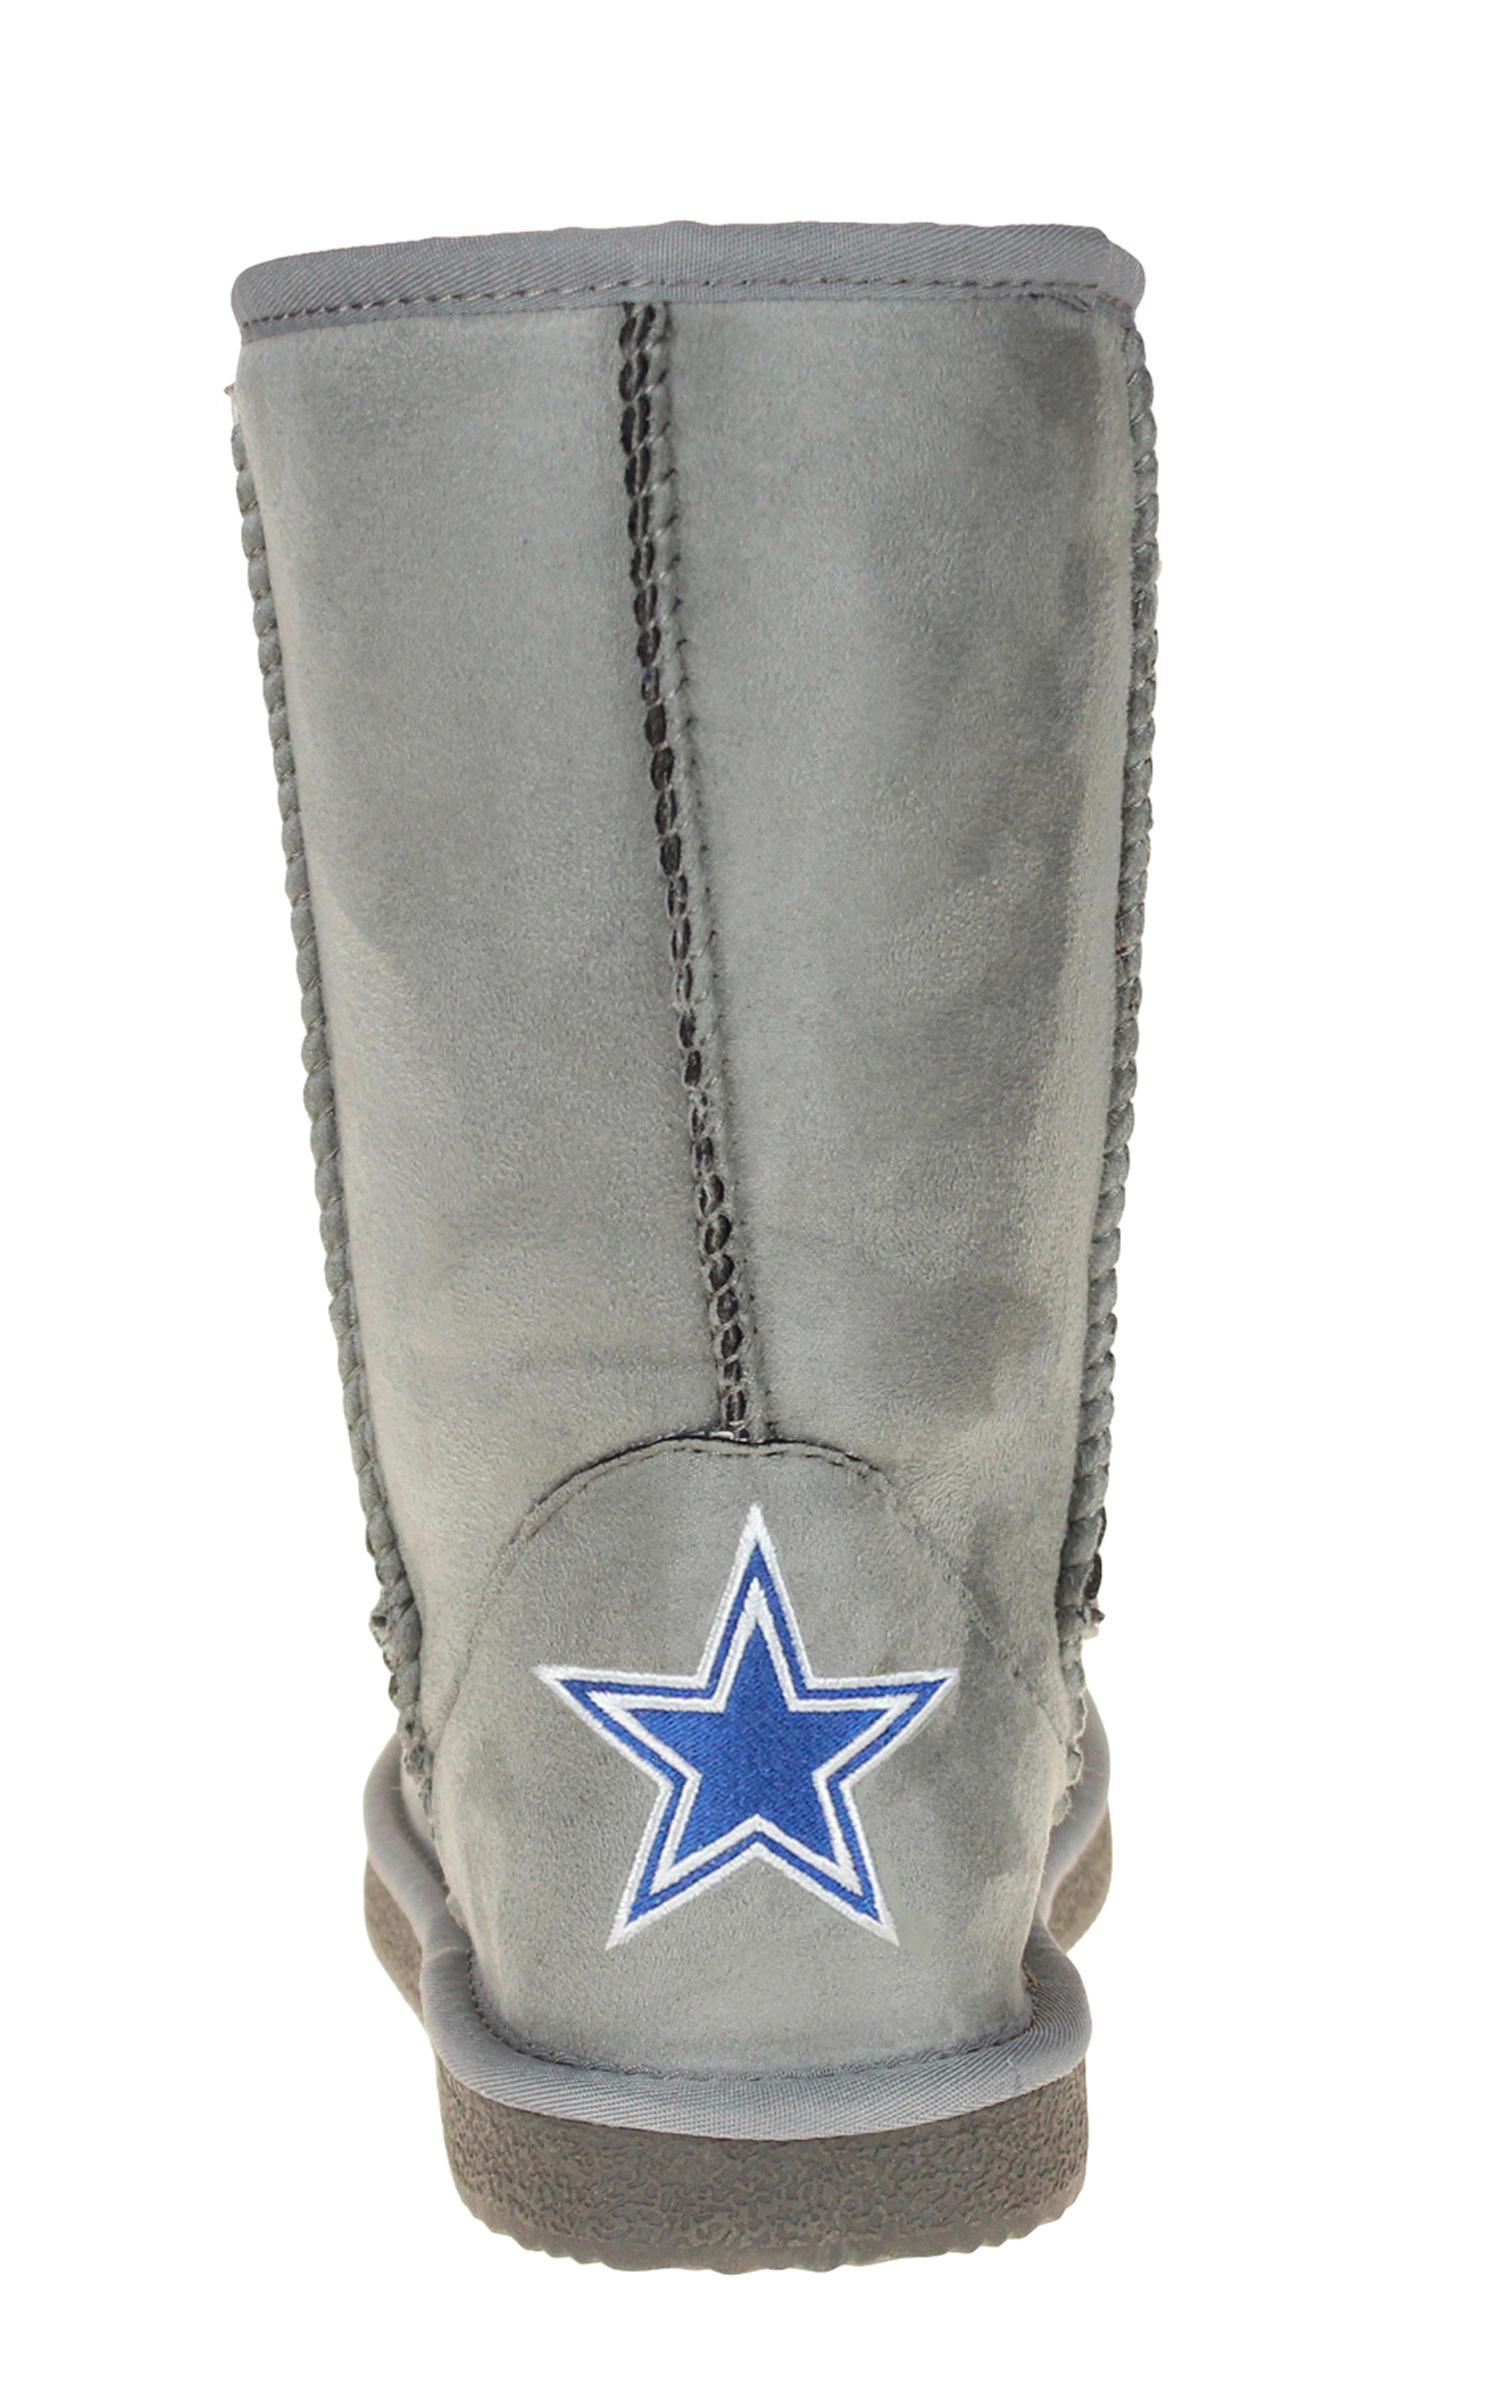 Cuce Shoes Dallas Cowboys NFL Football Women's The Devotee Boot - Gray